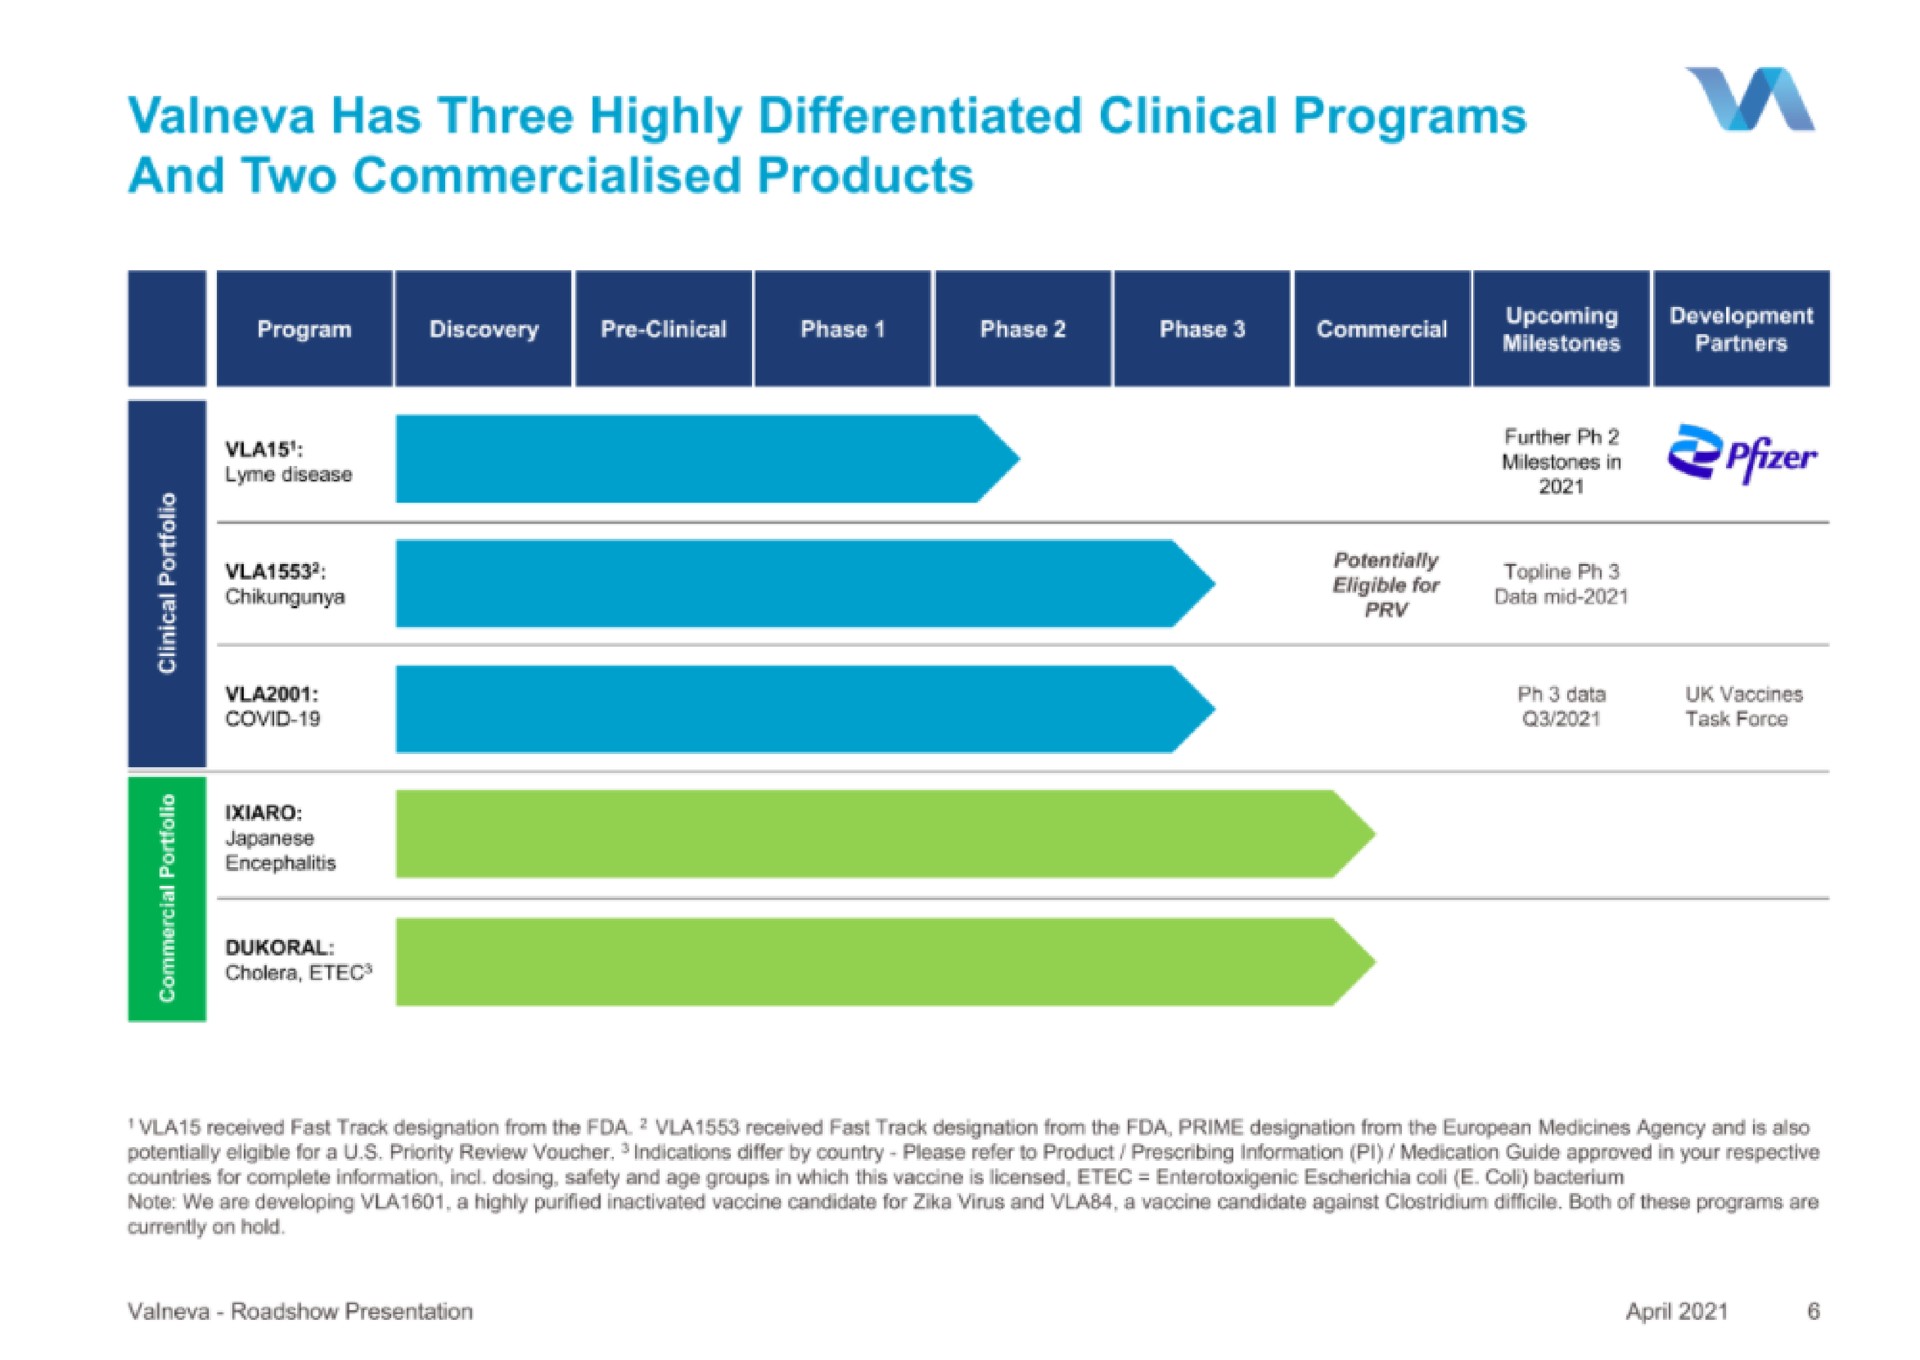 has three highly differentiated clinical programs and two products | Valneva